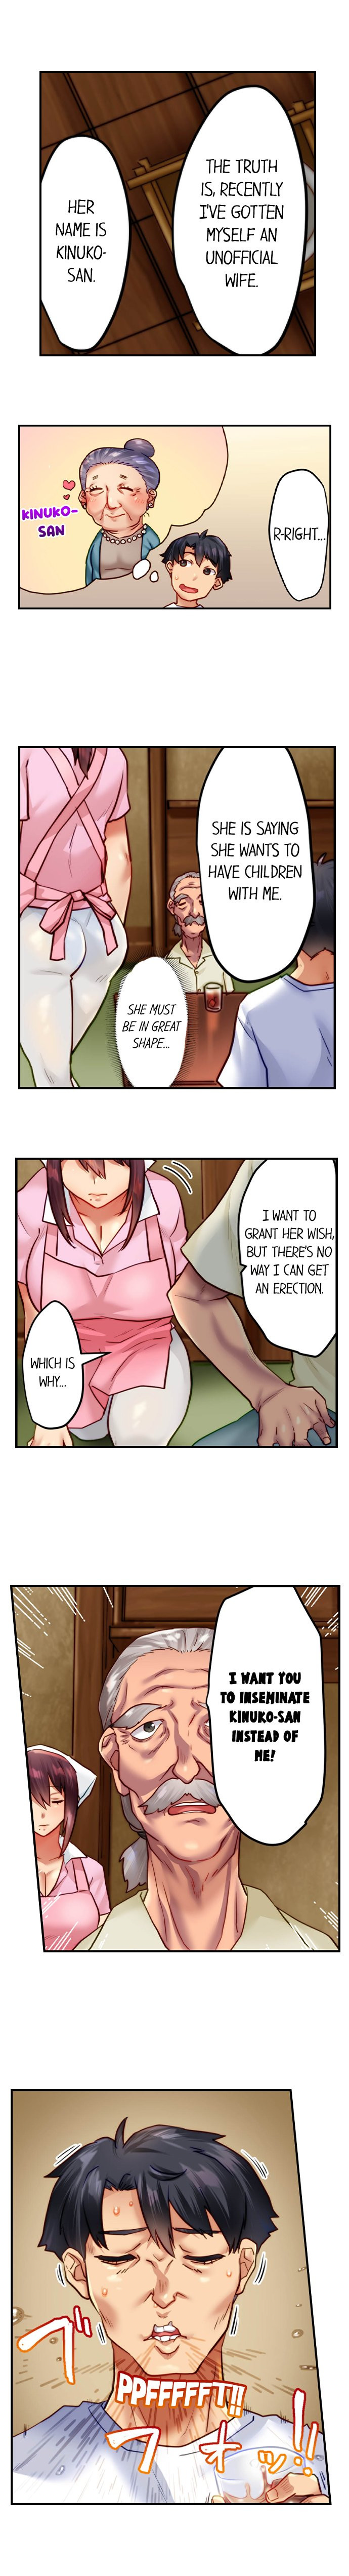 Risky Family Planning - Chapter 1 Page 3